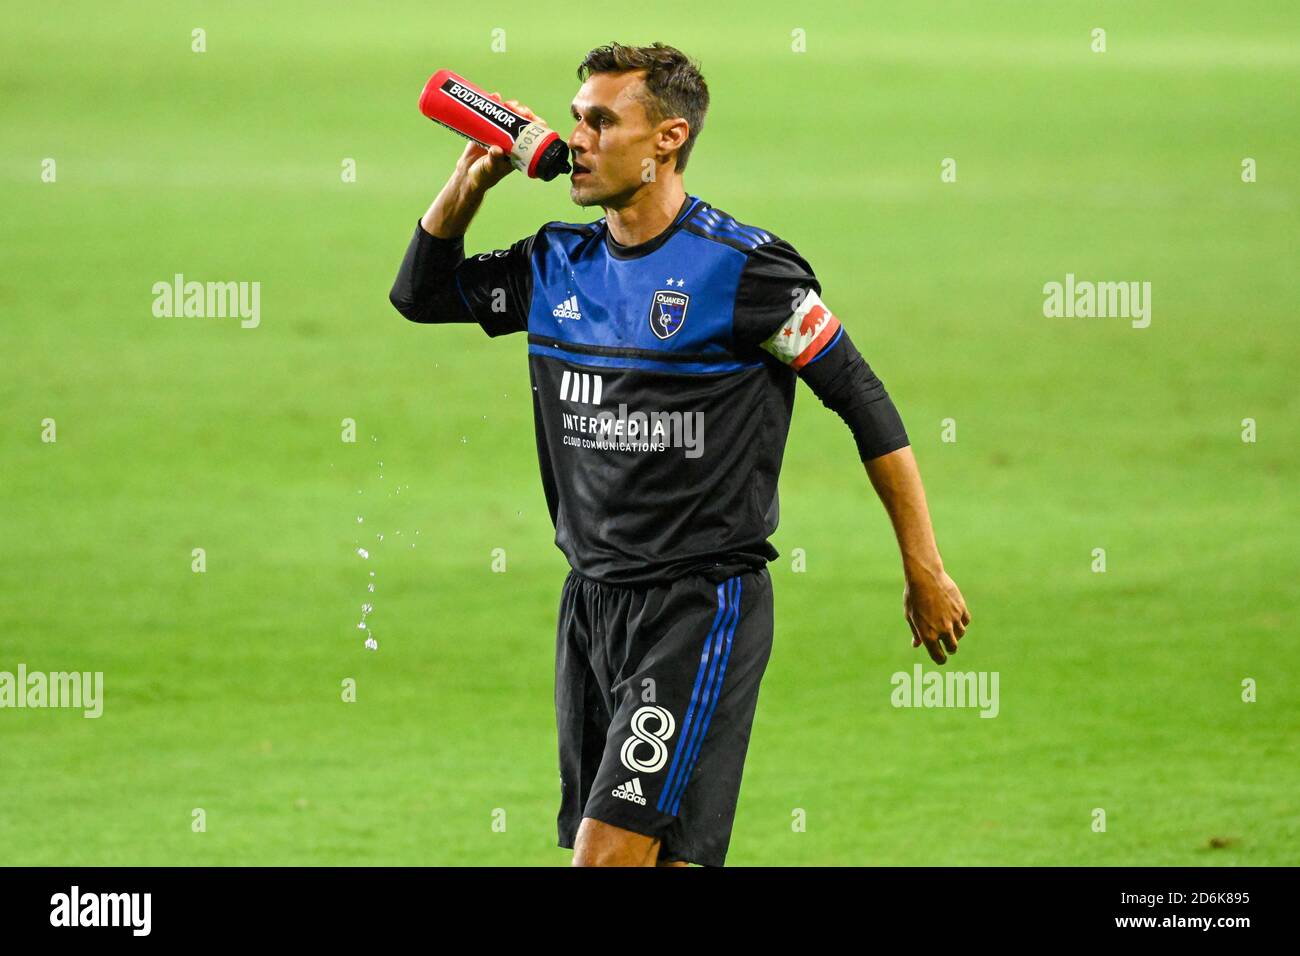 Carson, United States. 14th Oct, 2020. San Jose Earthquakes forward Chris Wondolowski (8) drinks from a Bodyarmor bottle during a MLS soccer game, Wednesday, Oct. 14, 2020, in Carson, Calif. The San Jose Earthquakes defeated Los Angeles Galaxy 4-0.(IOS/ESPA-Images) Credit: European Sports Photo Agency/Alamy Live News Stock Photo